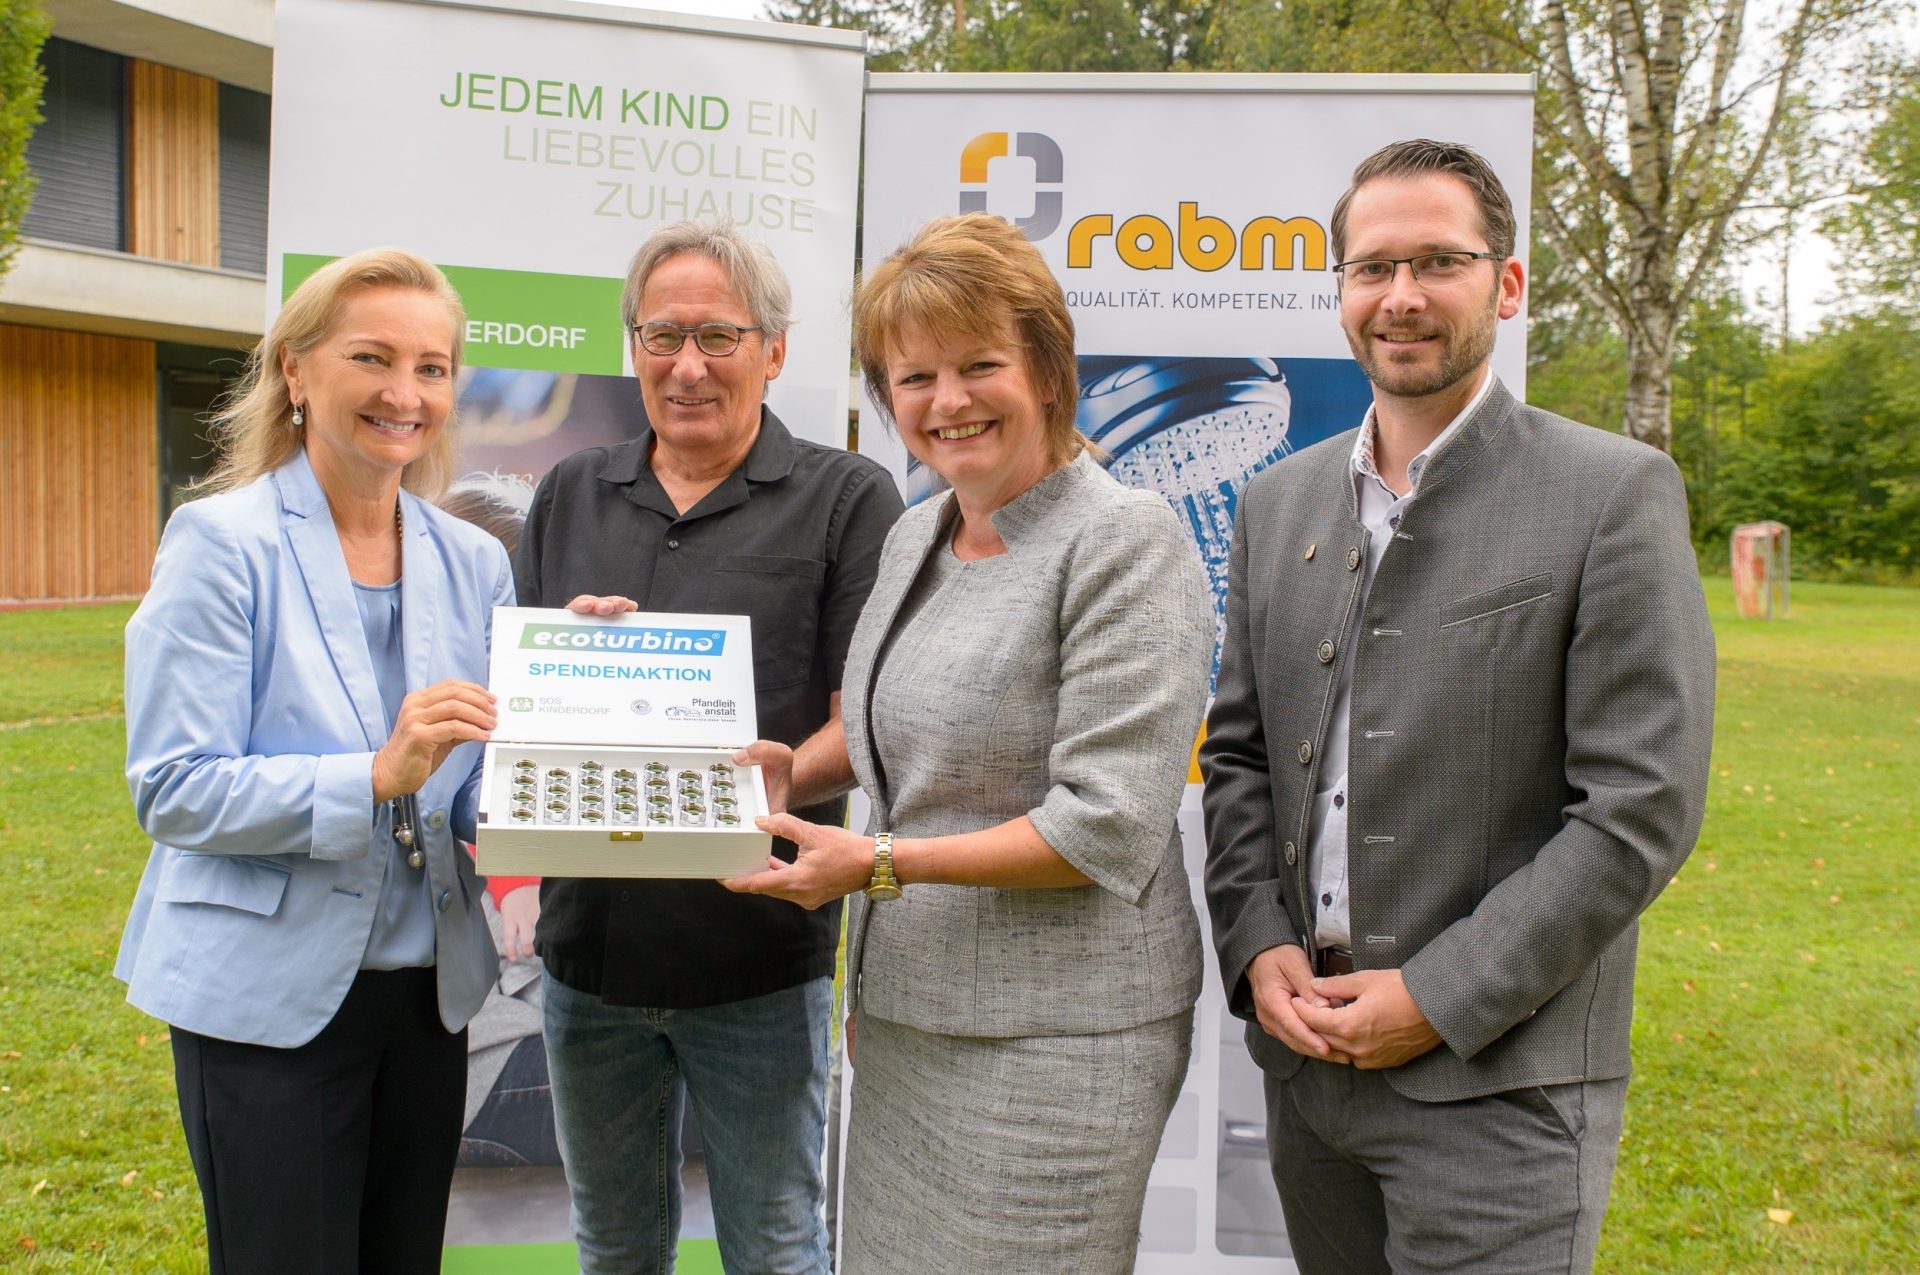 With environmental technology from Rabmer, the SOS Children's Villages save 25 million liters of water